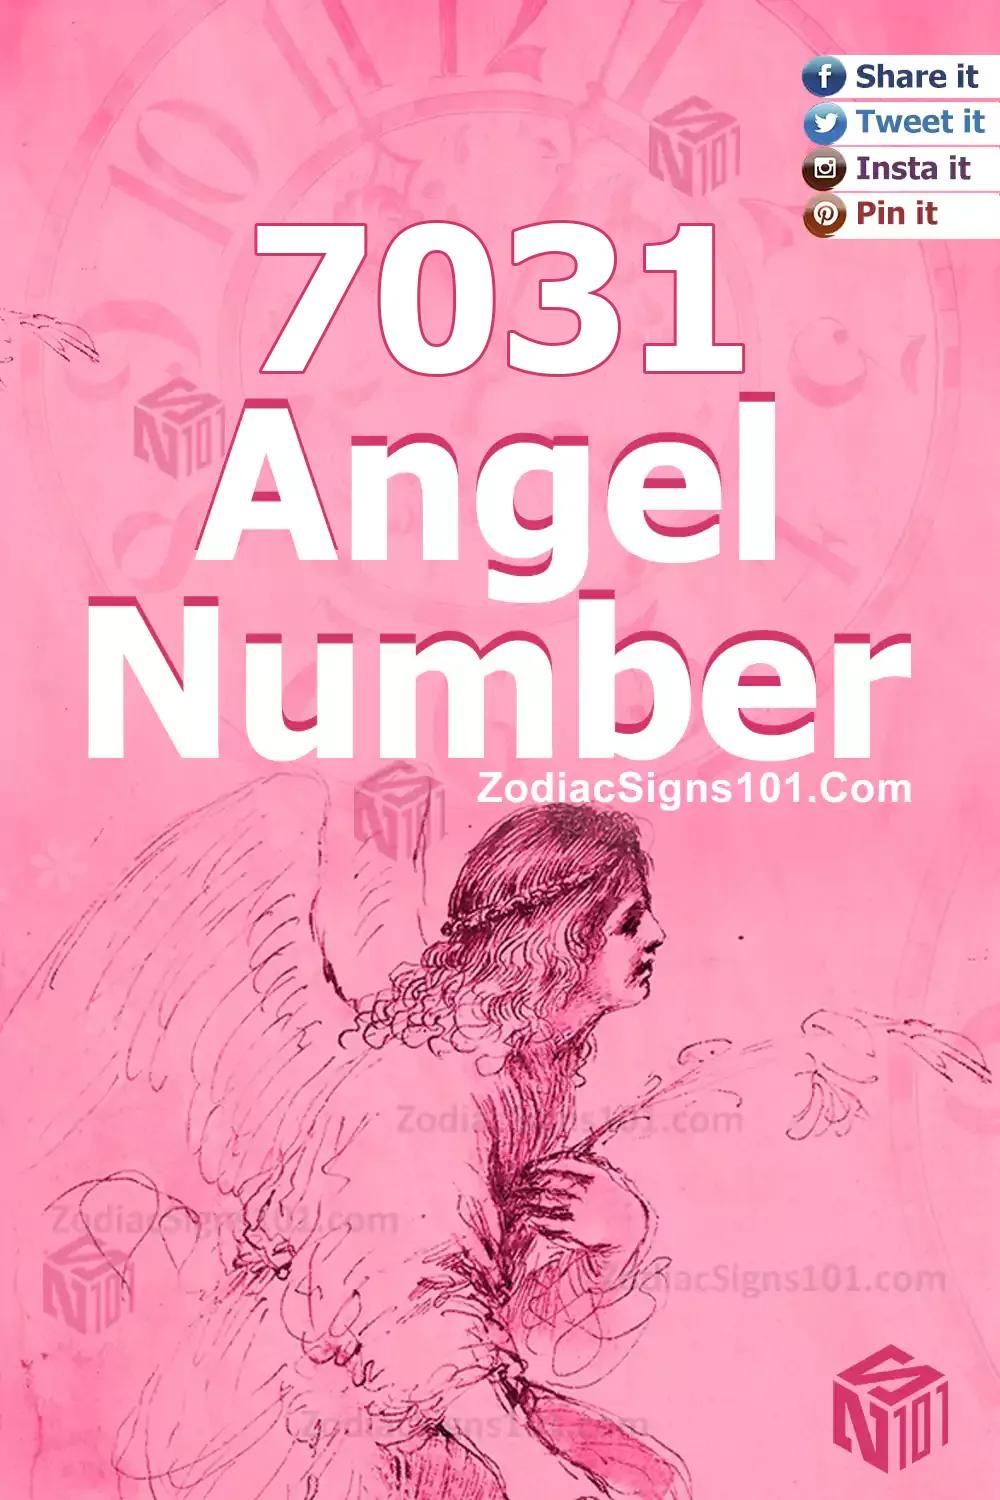 7031 Angel Number Meaning